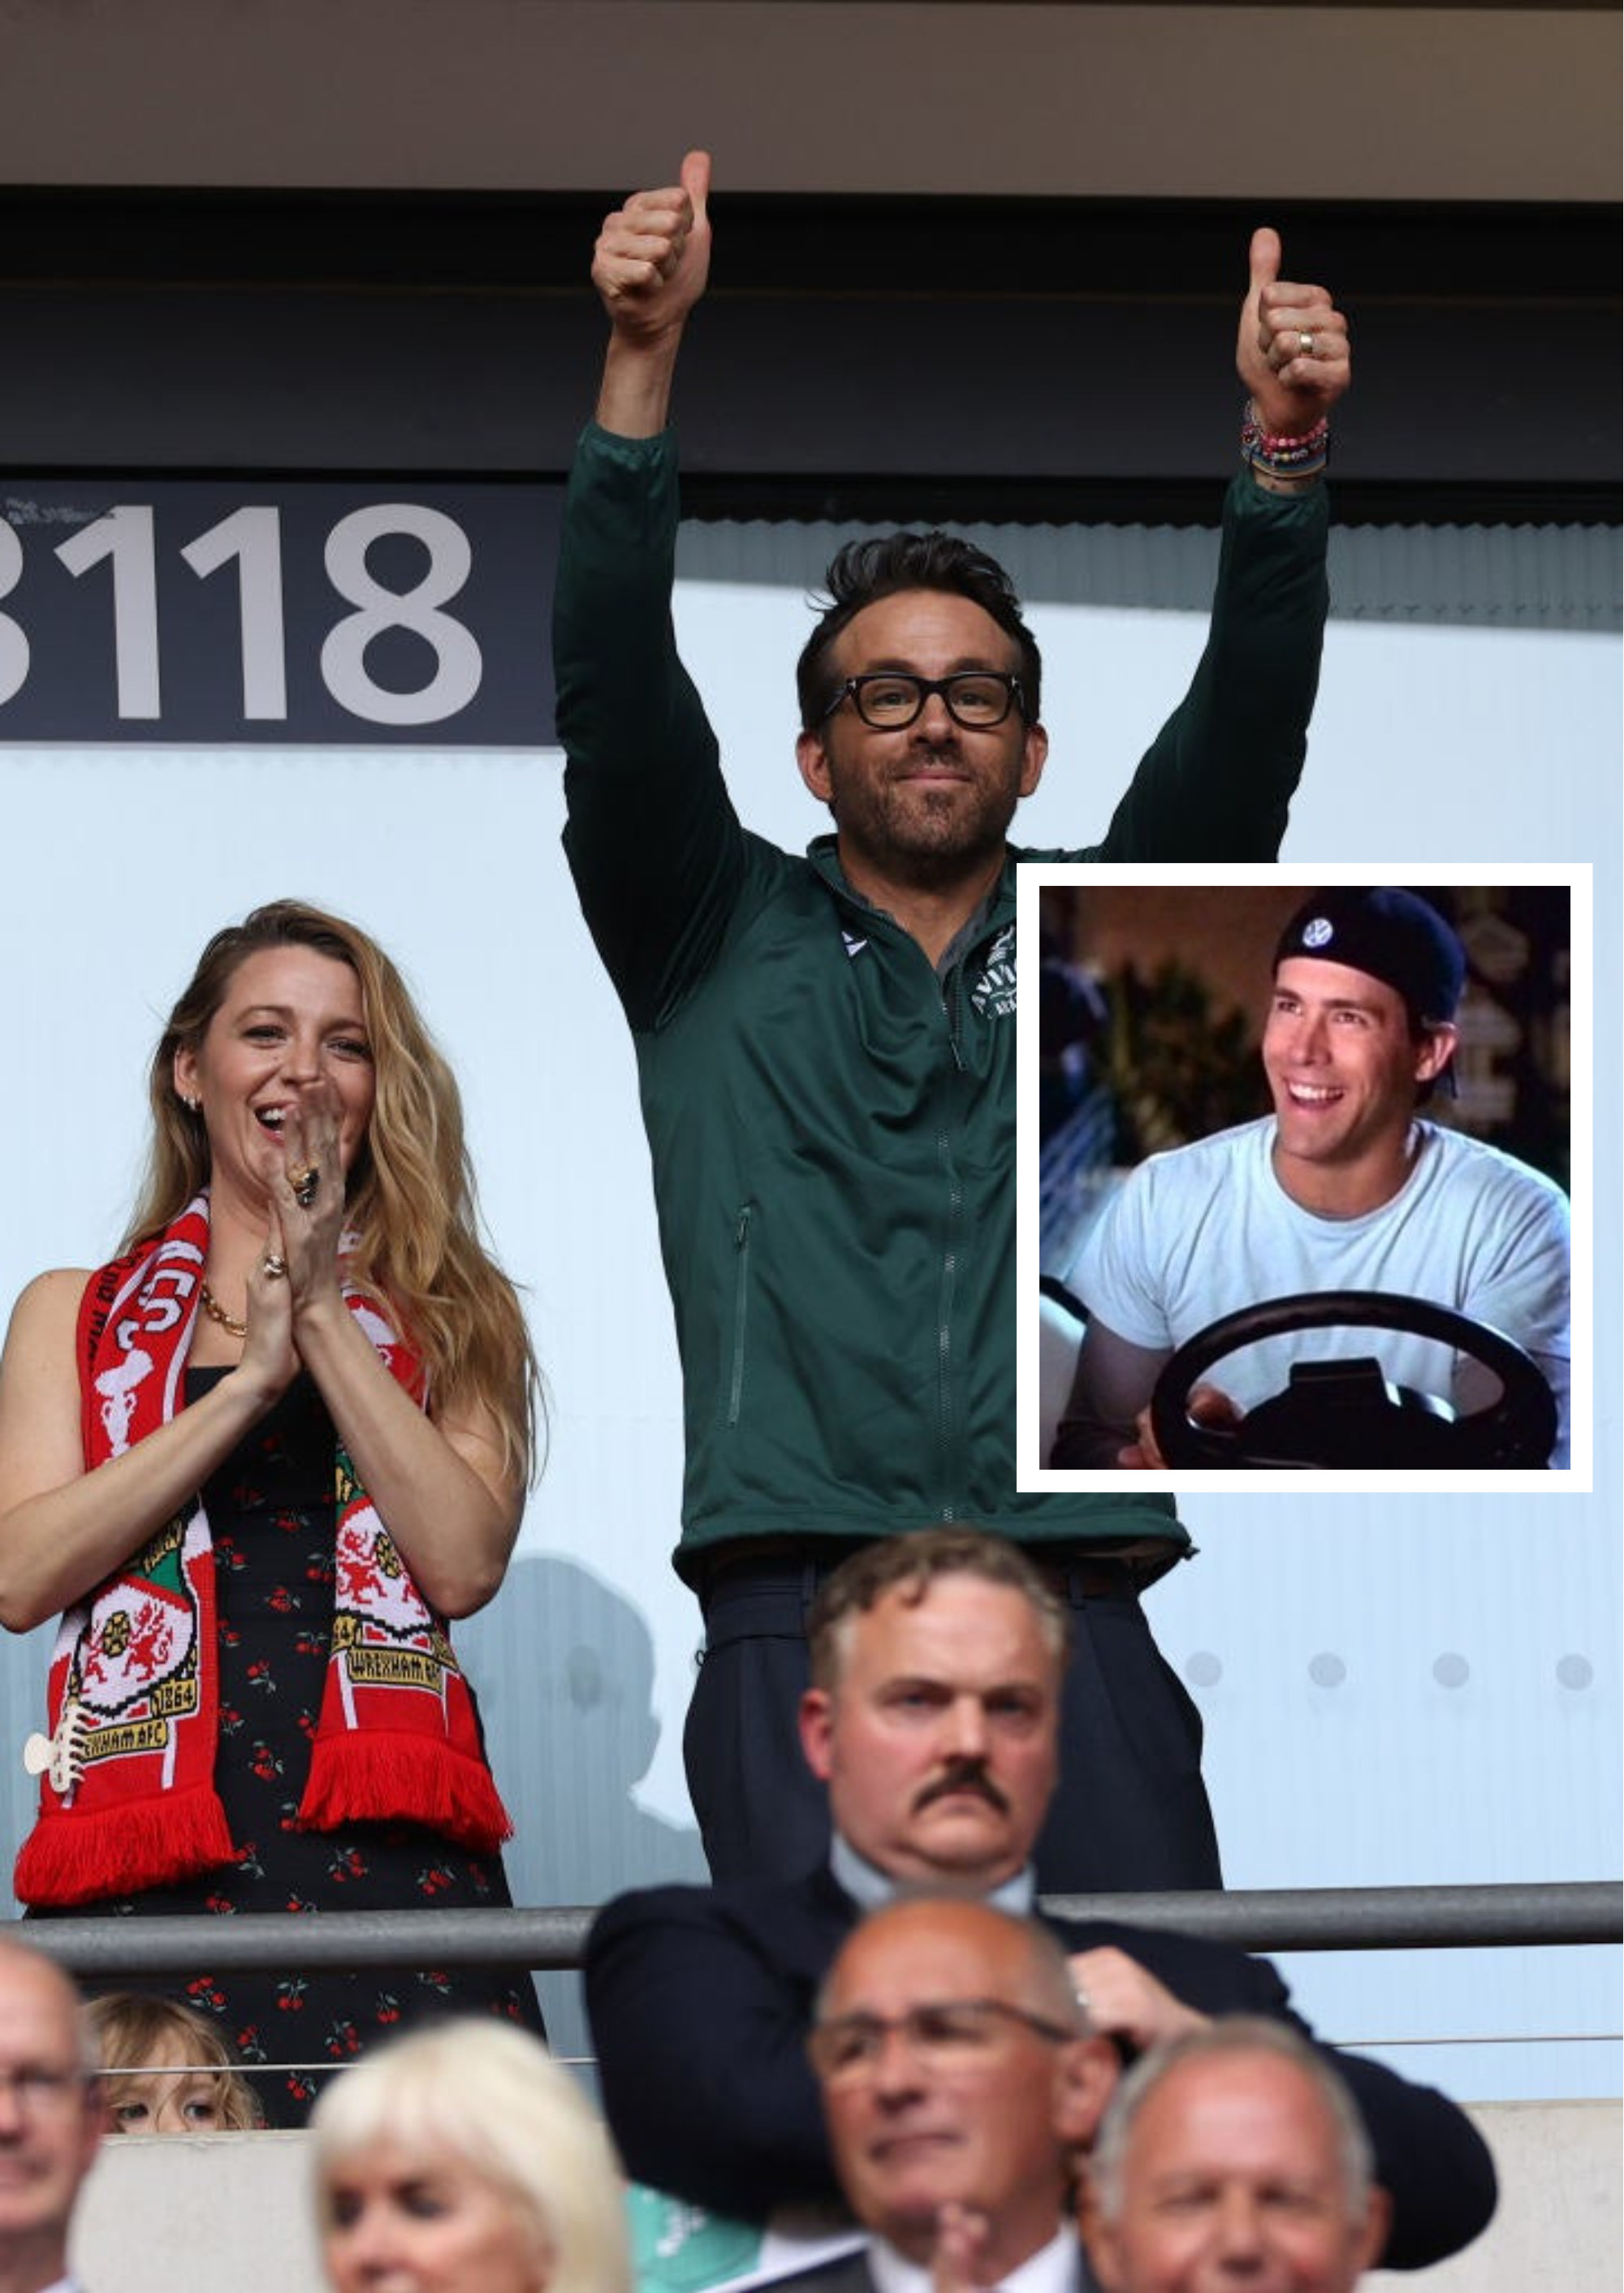 blake lively and ryan reynolds cheer at a soccer game (insert) ryan reynolds in &quot;van wilder&quot;